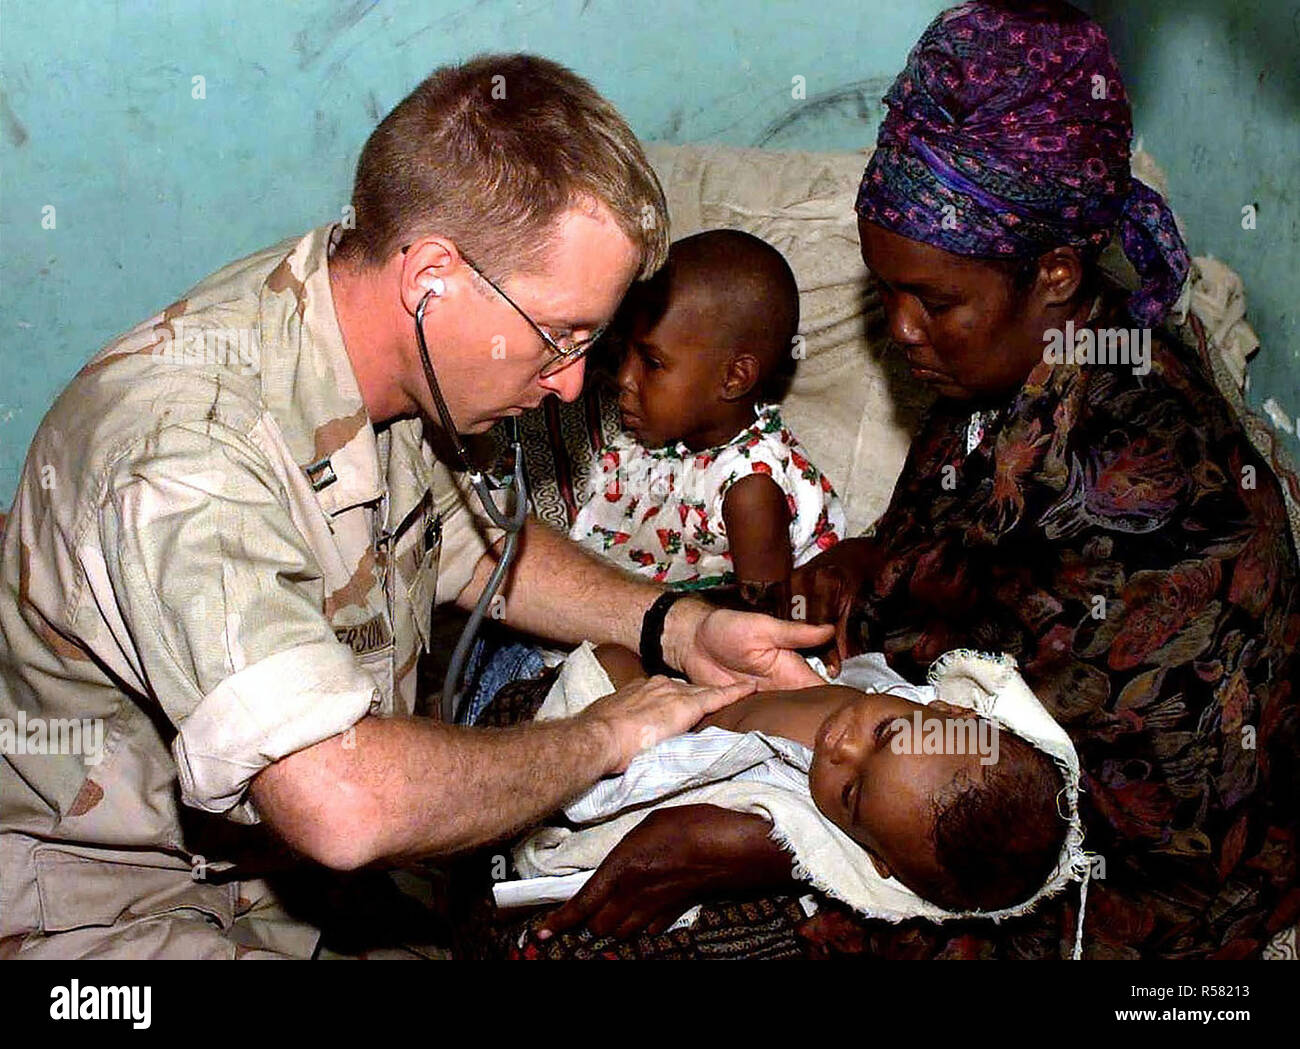 1993 - A US Navy doctor examines a Somali infant in her mother's arms during a medical civic action program in the capital city of Mogadishu, Somalia. Stock Photo